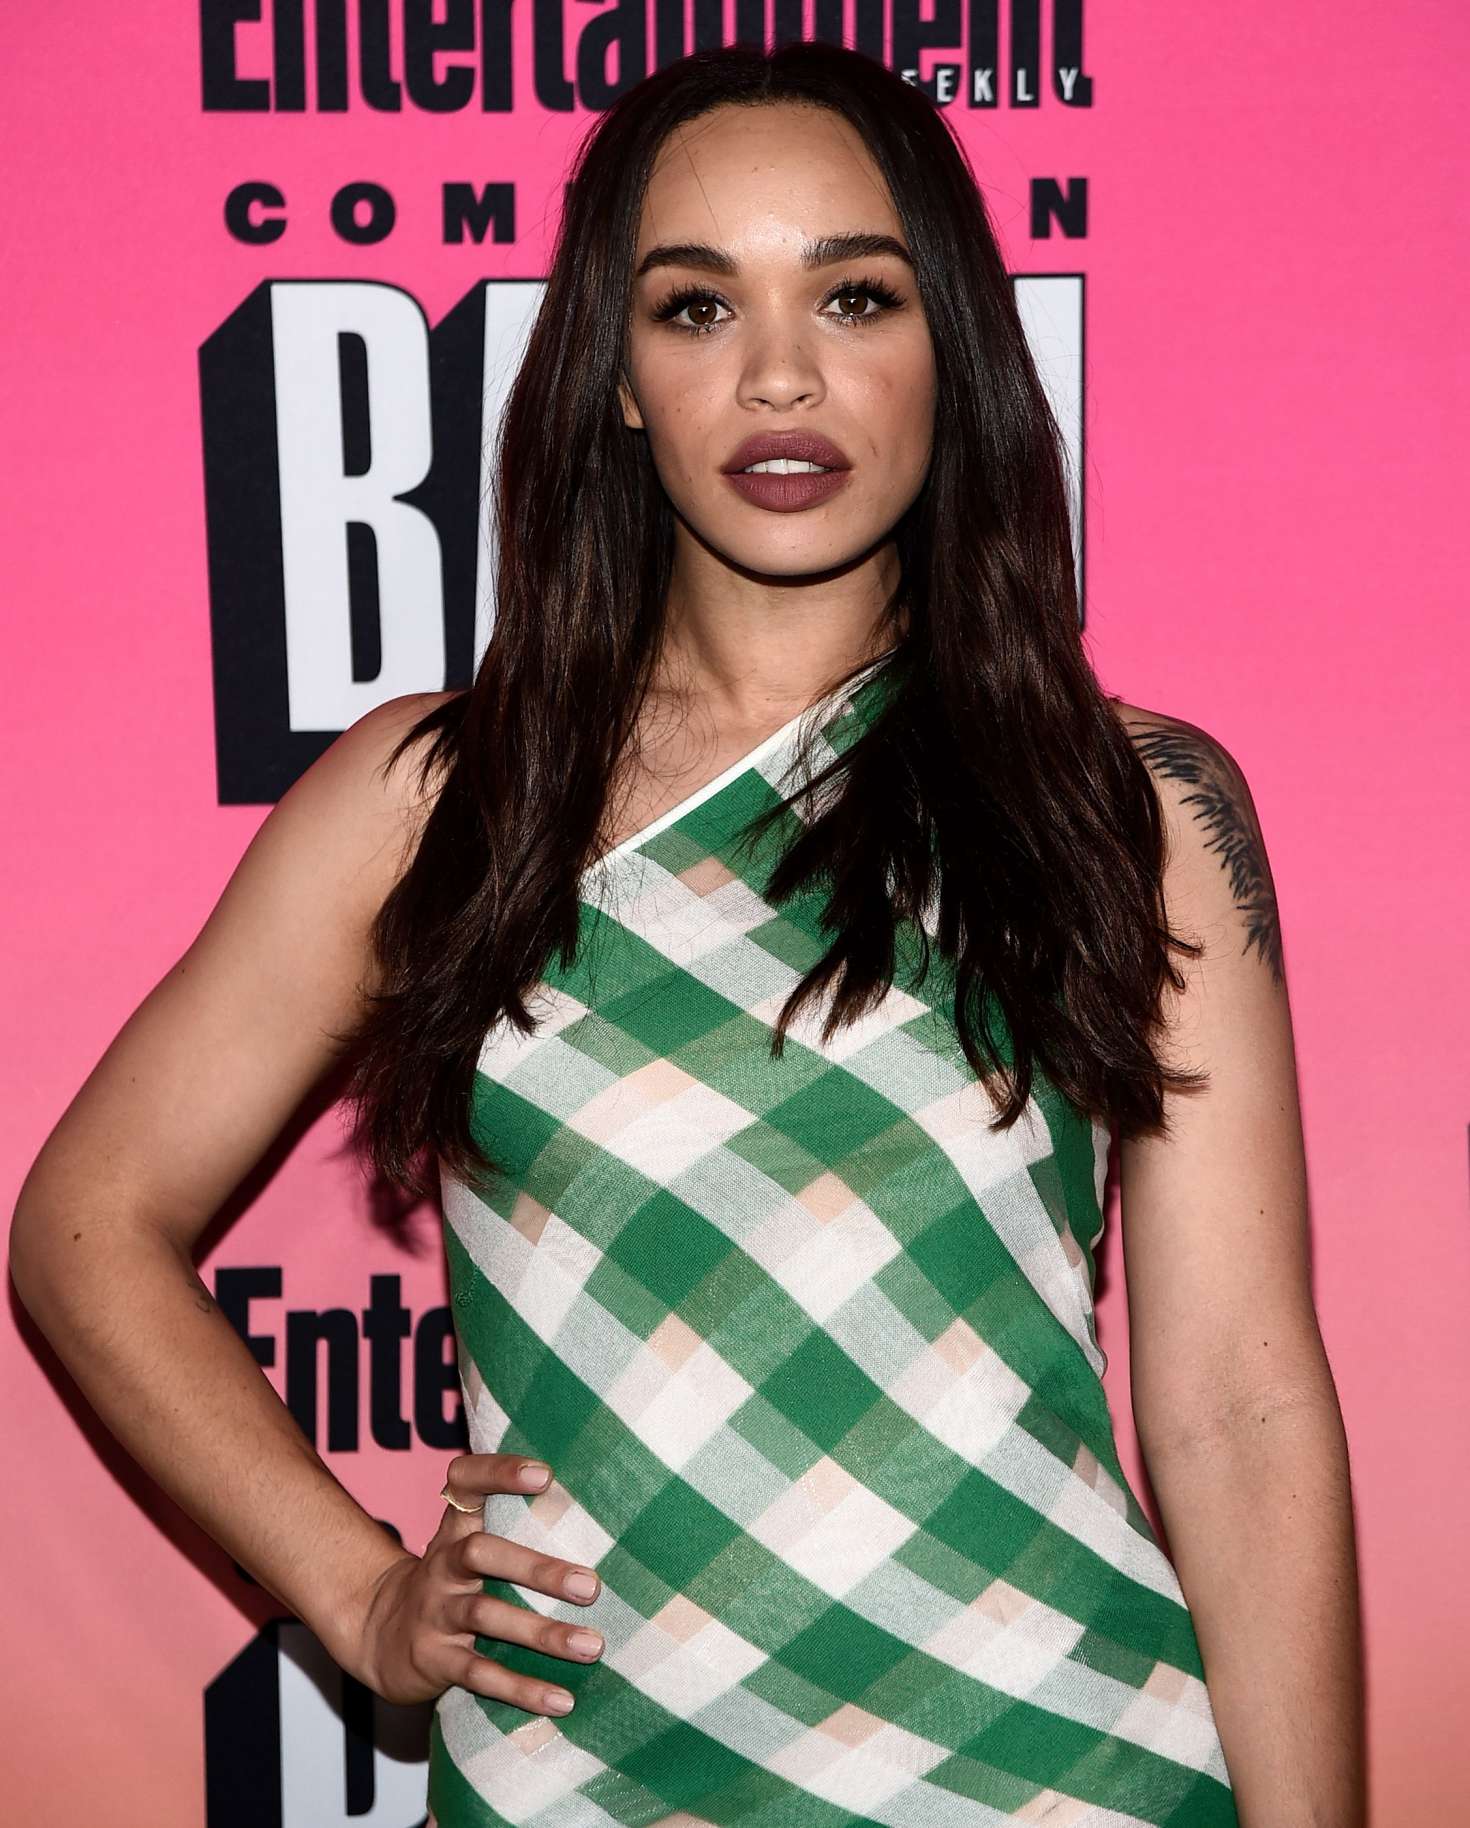 Cleopatra Coleman 2016 : Cleopatra Coleman: Entertainment Weekly Annual Comic-Con Party 2016 -03